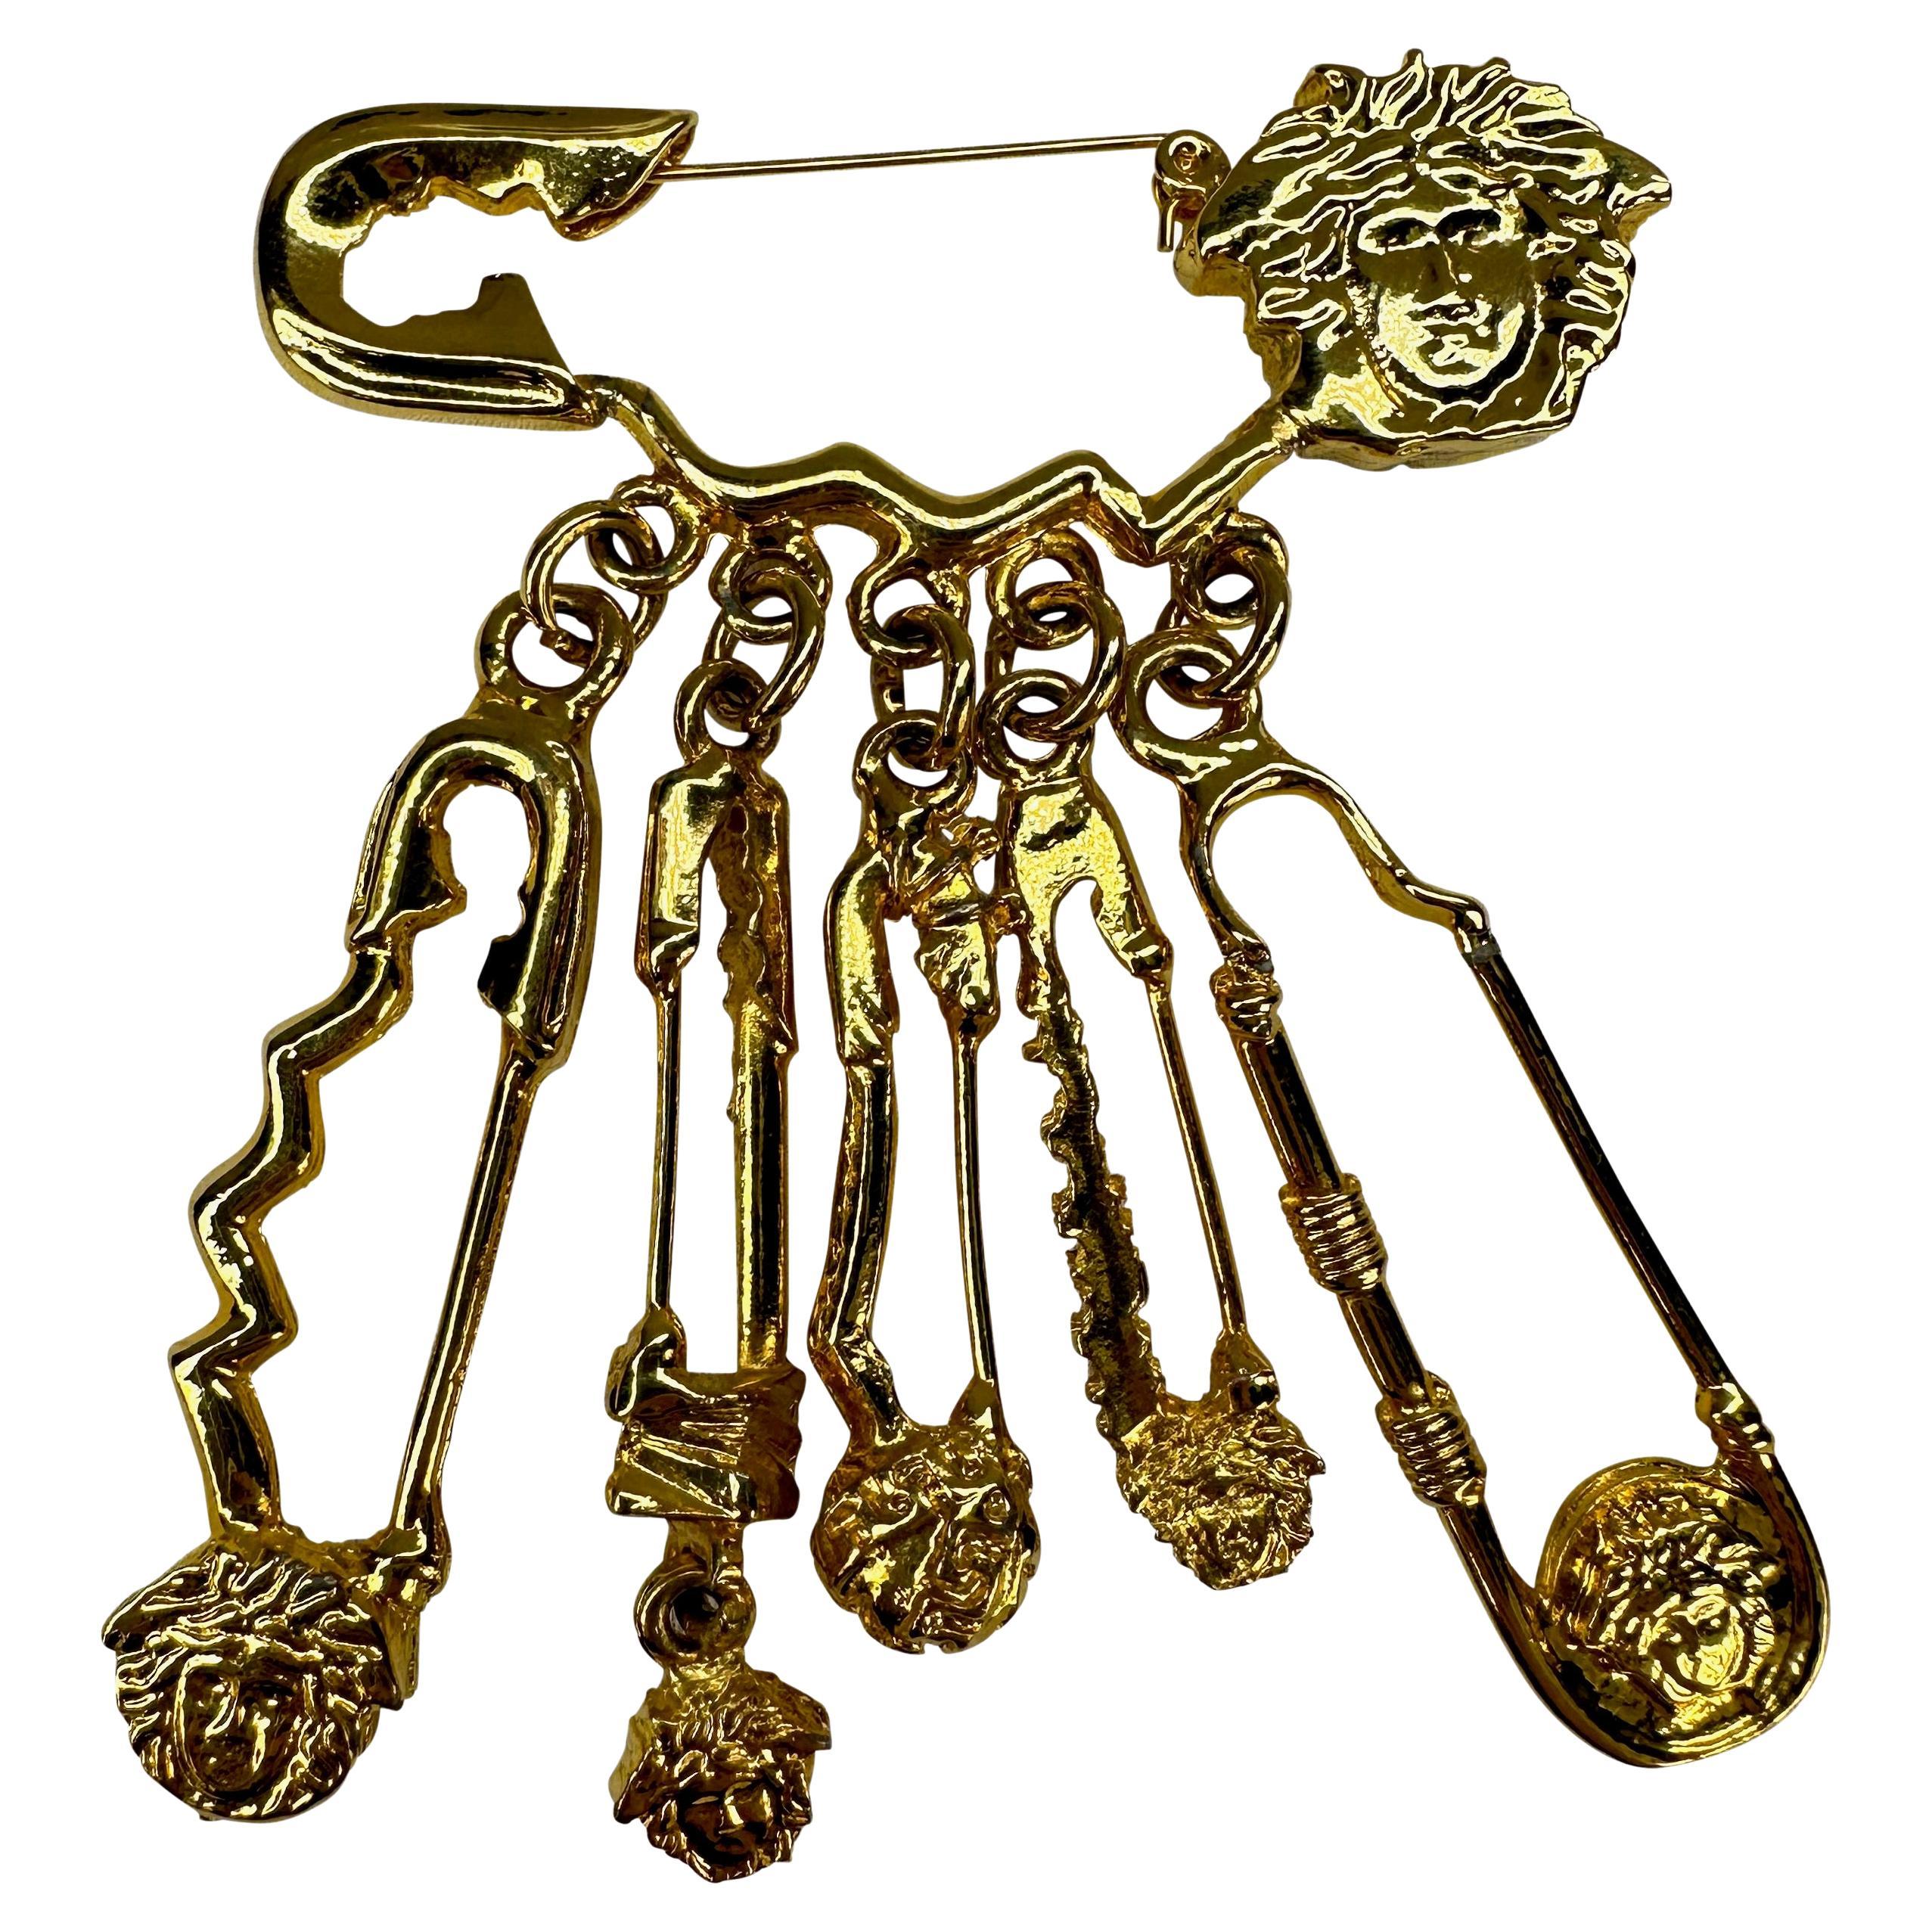 S/S 1994 Gianni Versace Gold Tone Medusa Logo Safety Pin Costume Brooch  In Excellent Condition For Sale In West Hollywood, CA